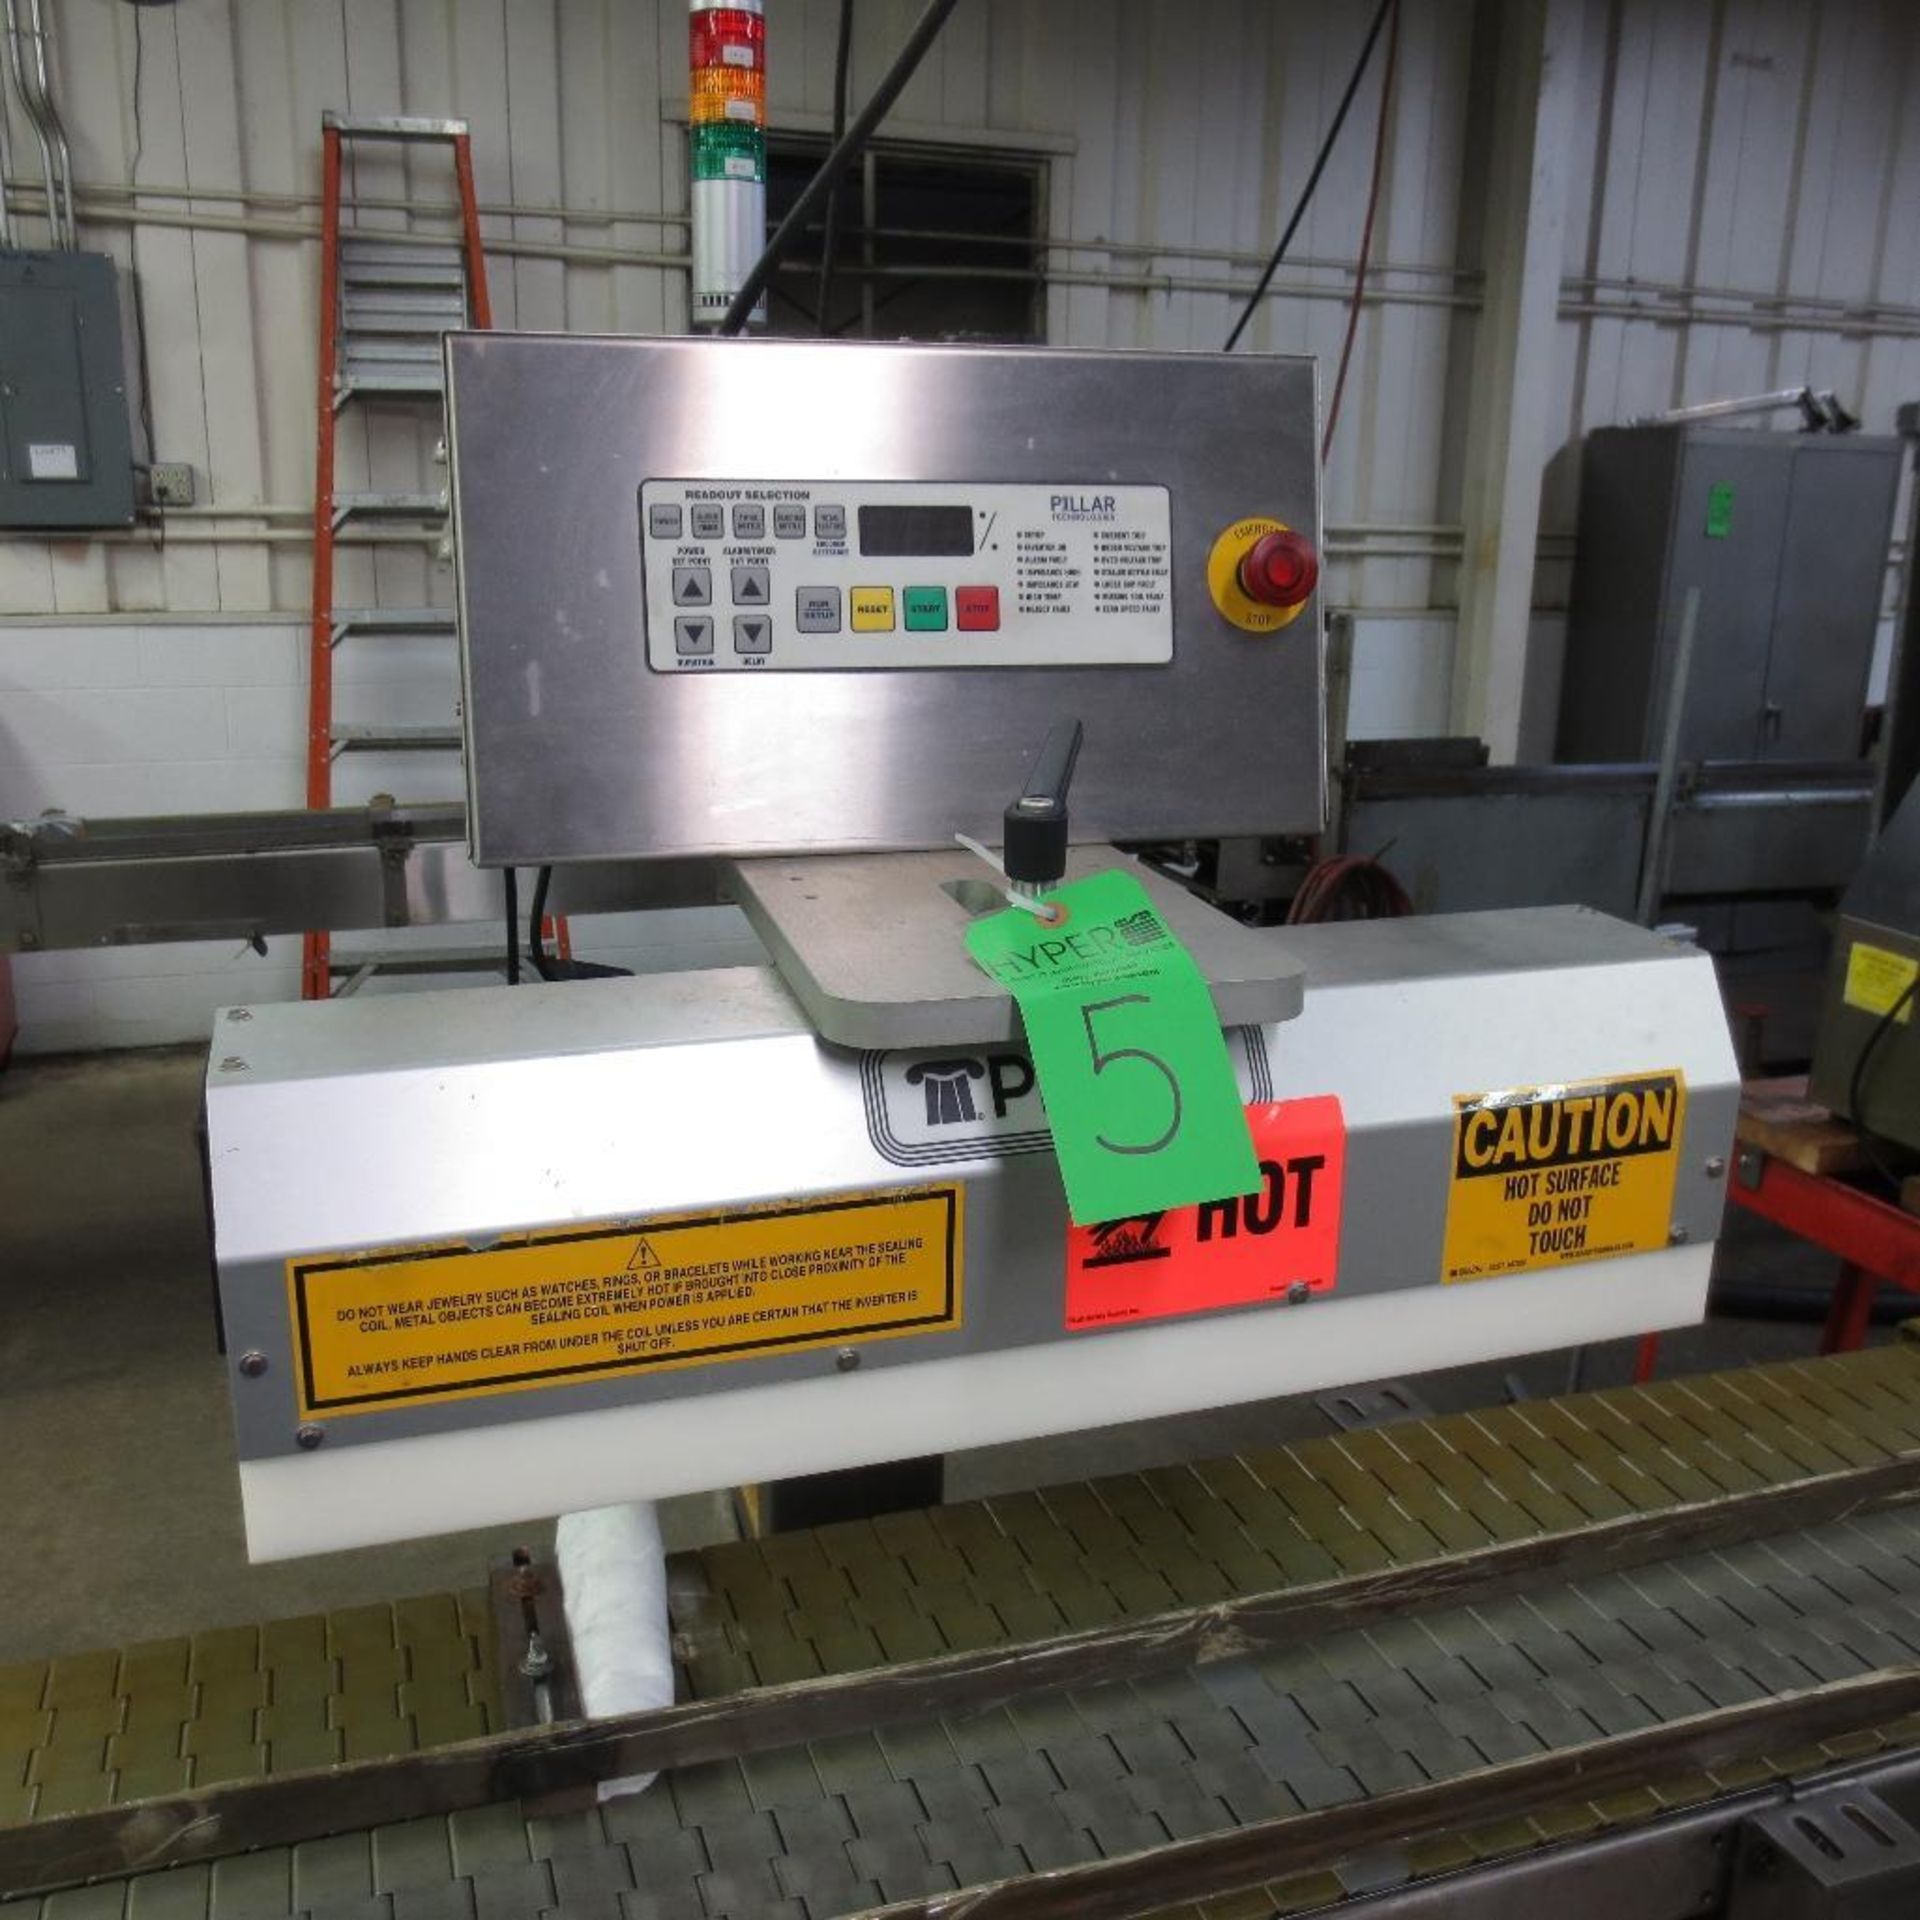 Pillar Unifoiler U2P1042000000 Induction Sealer, 2kW Capacity, Stainless Steel, Tunnel Sealing Coil, - Image 2 of 5